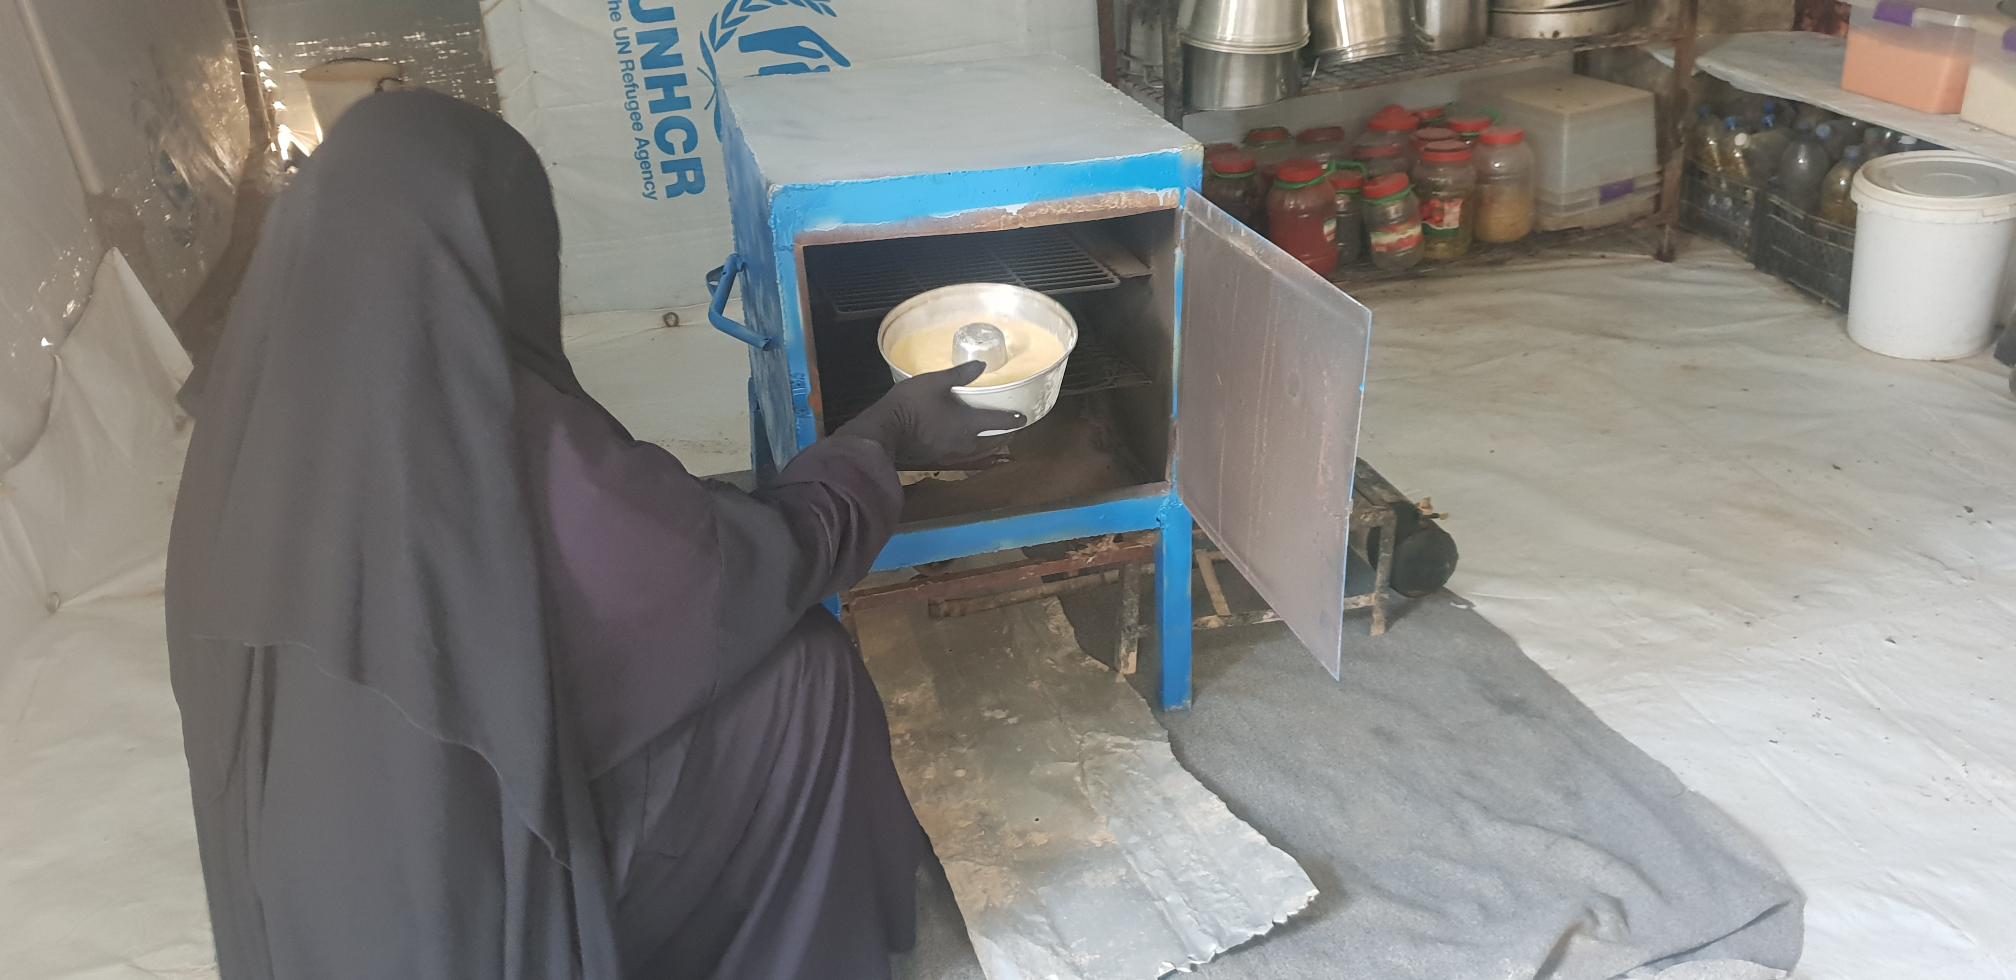 woman placing a cake in the oven